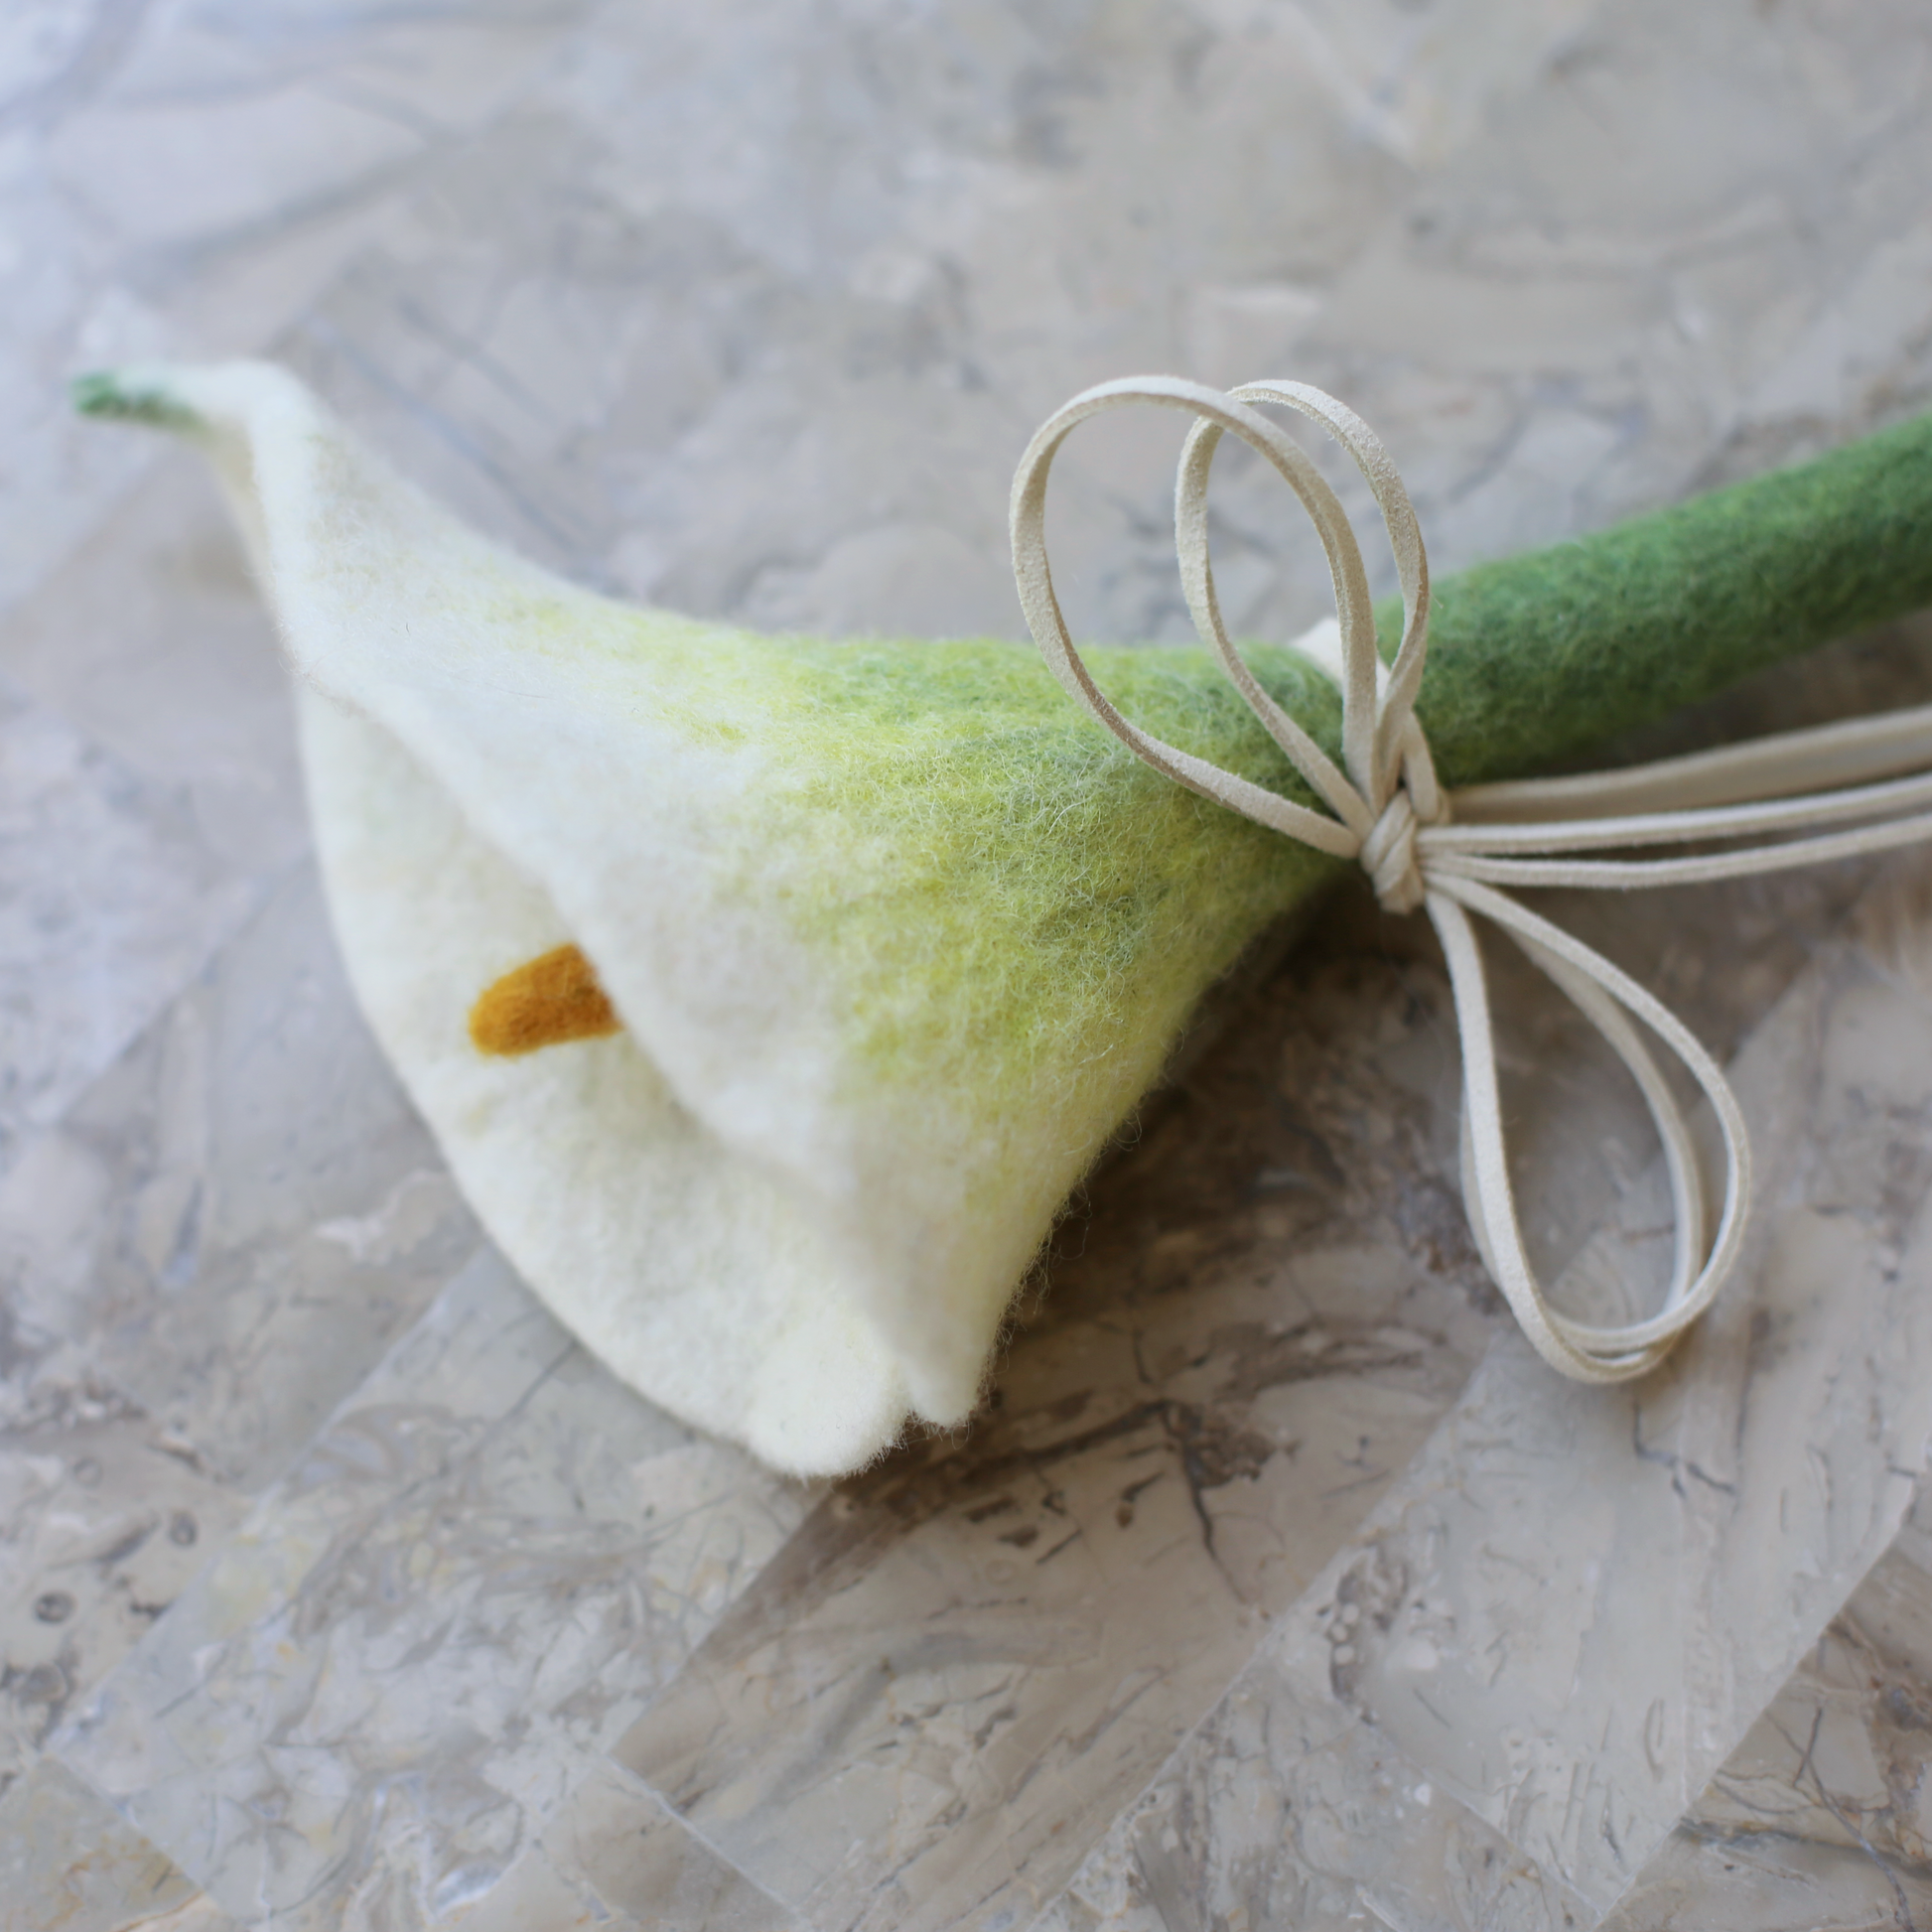 close up of wool aesthetic cat toy wand by catenary home in the shape of a calla lily teaser toy modern cat furniture